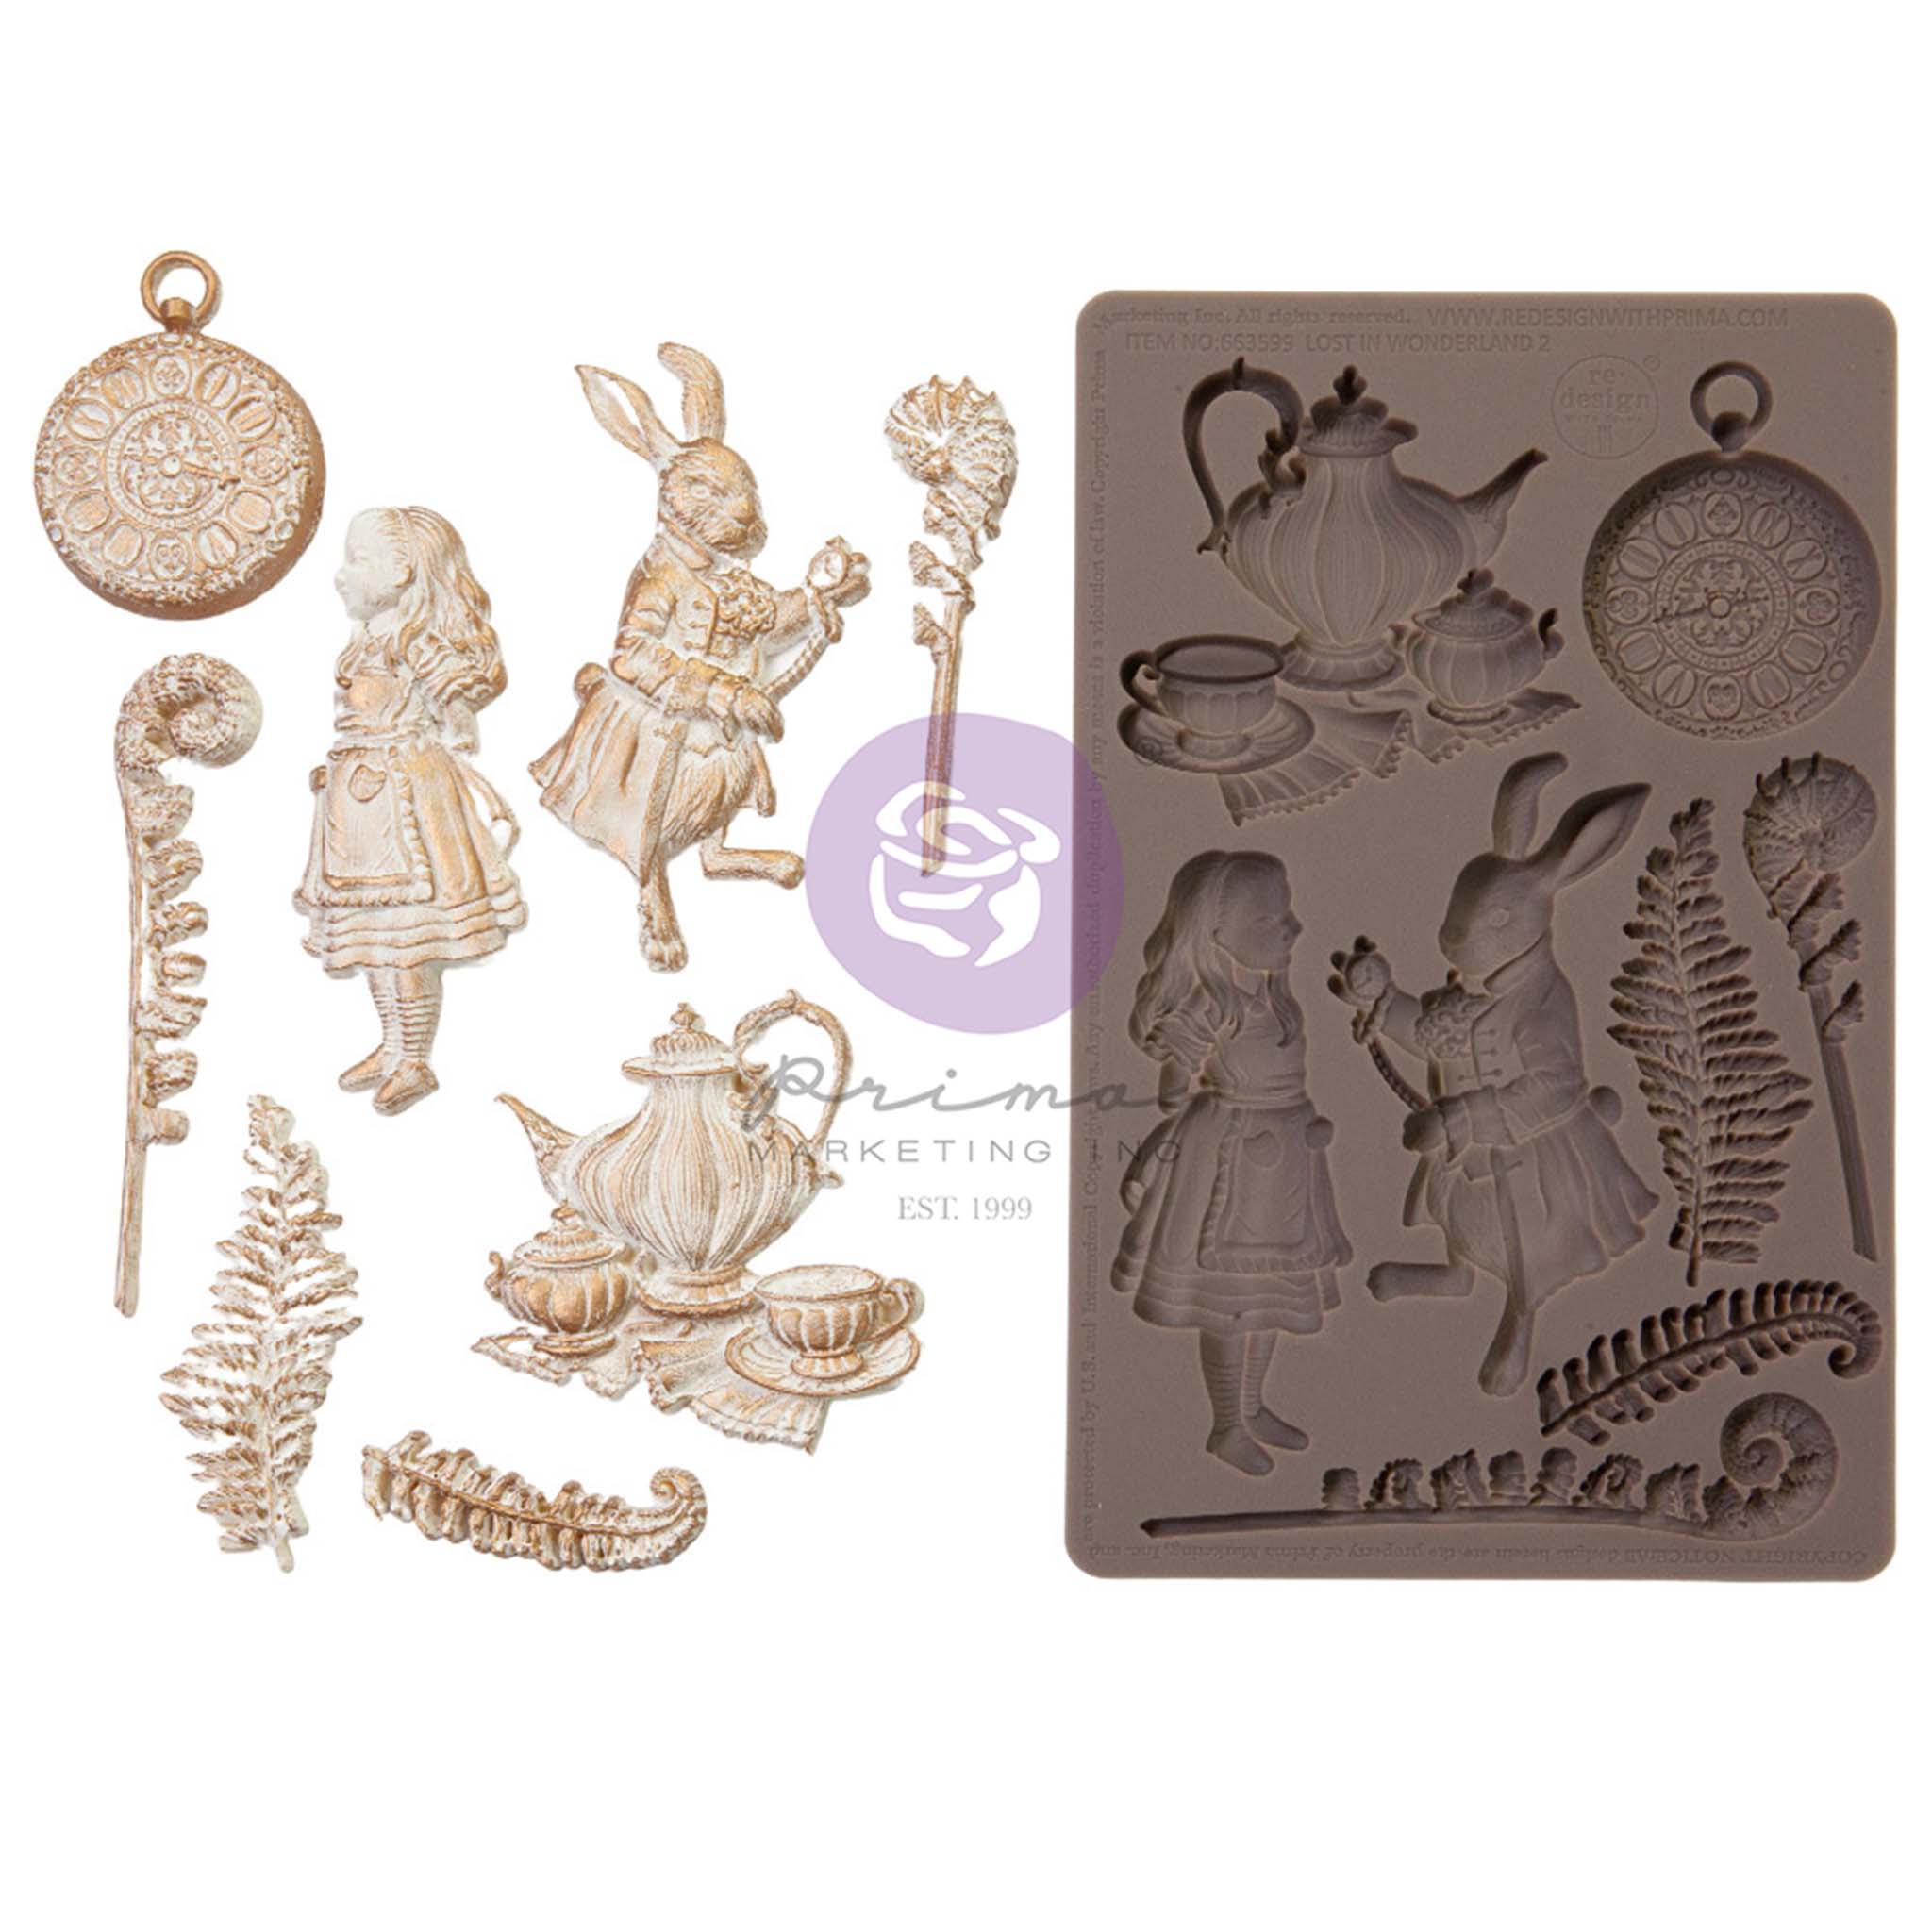 Gold and white colored silicone mold castings and a brown silicone mold of Prima's Marketing's Following Alice are against a white background. This mold features Alice, the White Rabbit, a tea set, pocket watch, and fern.